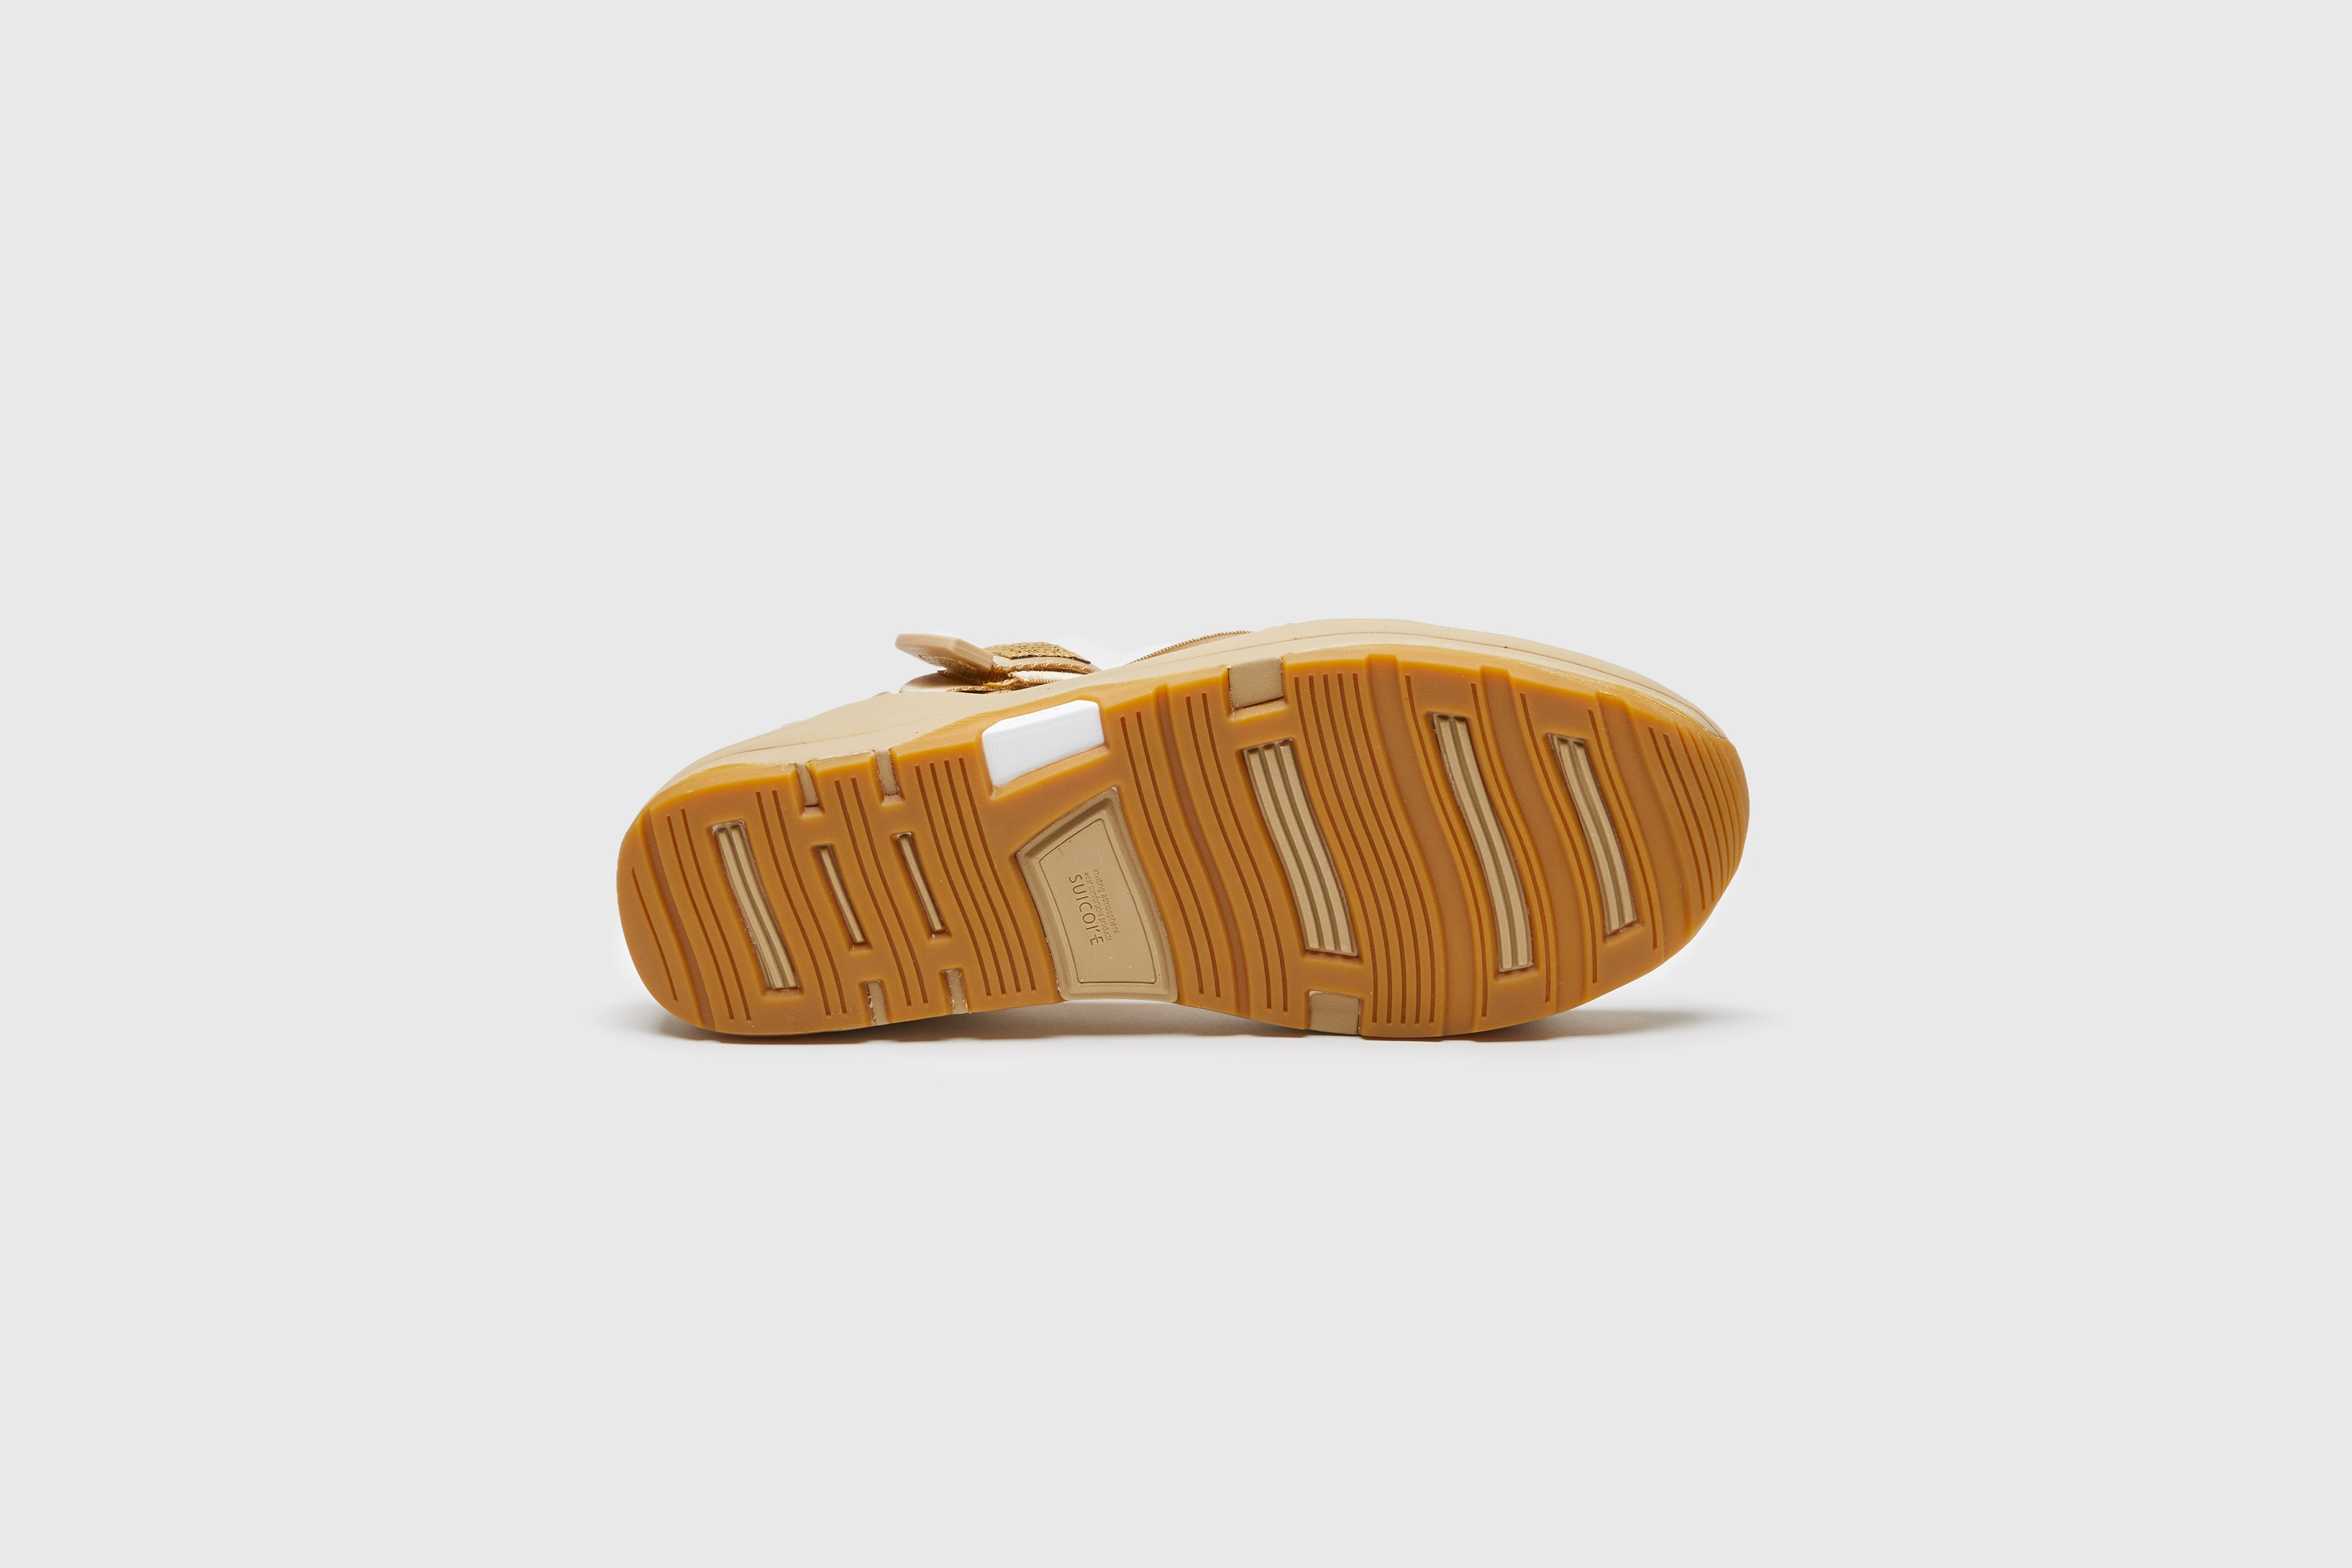 SUICOKE AKK-ab sneakers with brown &amp; yellow nylon upper, brown &amp; yellow midsole and sole, strap and logo patch. From Spring/Summer 2023 collection on eightywingold Web Store, an official partner of SUICOKE. OG-285AB BROWN X YELLOW